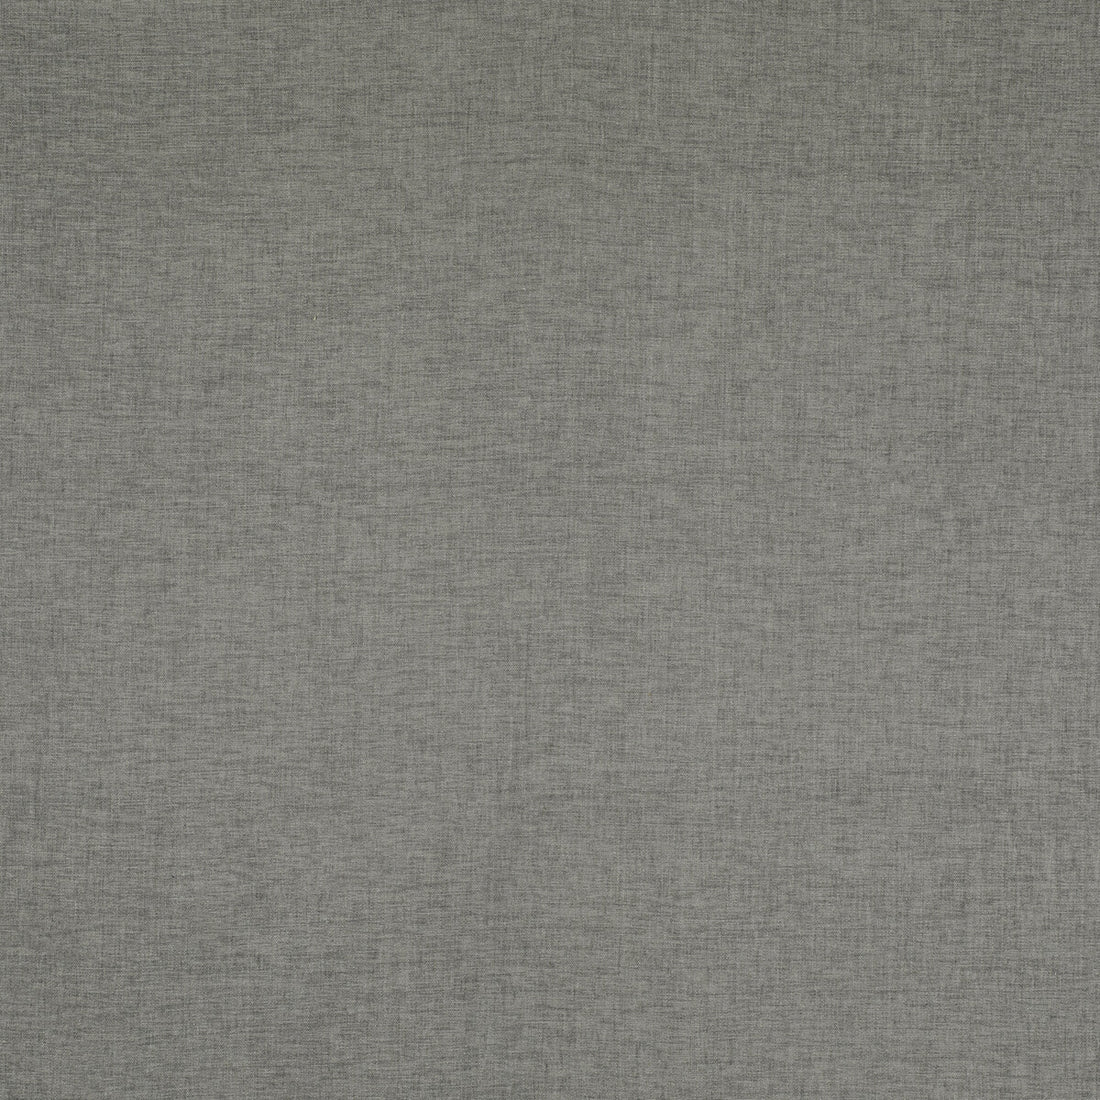 Kravet Smart fabric in 36095-11 color - pattern 36095.11.0 - by Kravet Smart in the Eco-Friendly Chenille collection